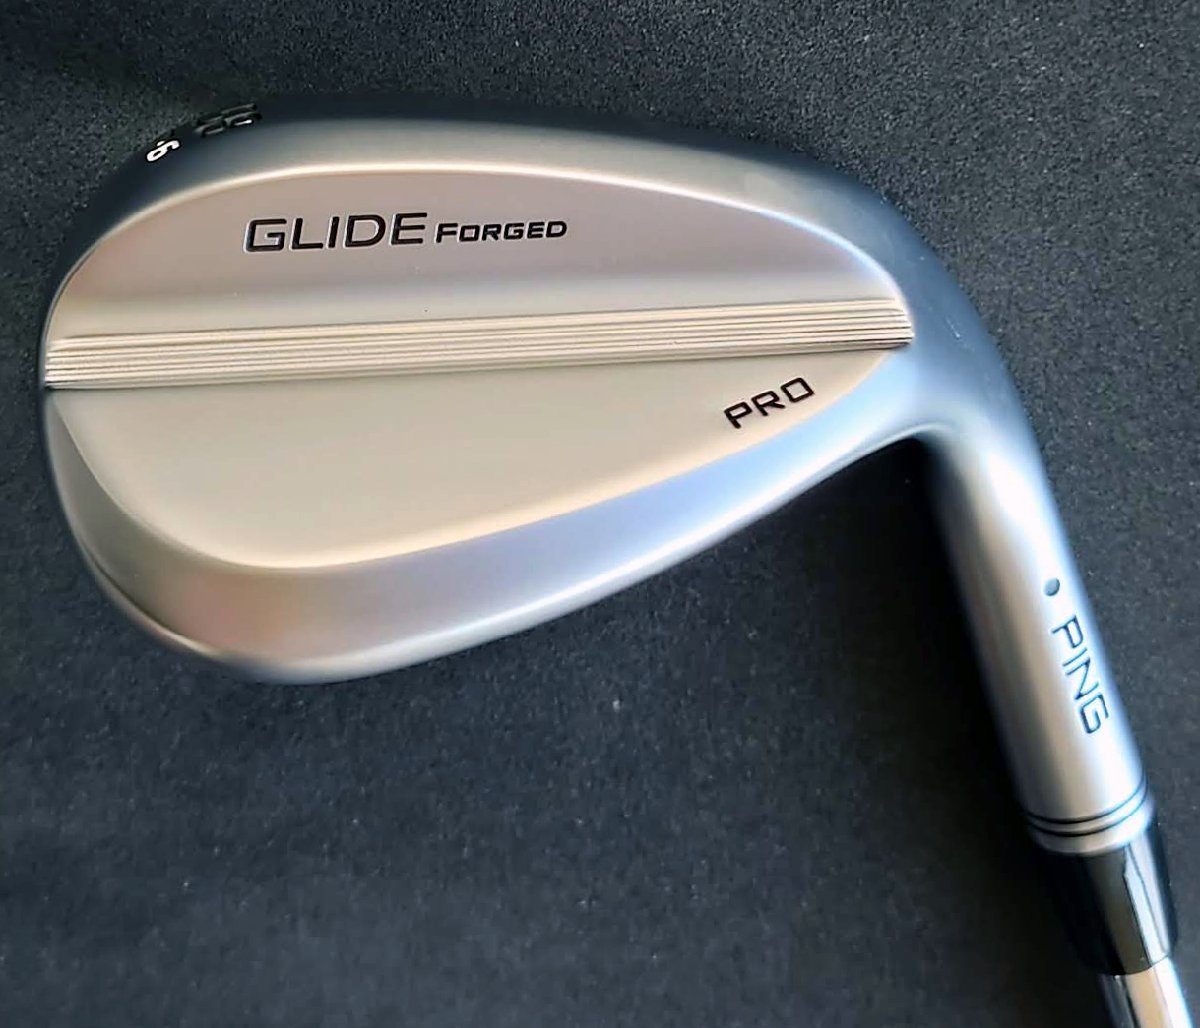 ZS156■PING ピン GLIDE FORGED PRO ウェッジ Tグラインド 58度 N.S.PRO 850GH neo (S)【中古・超美品】